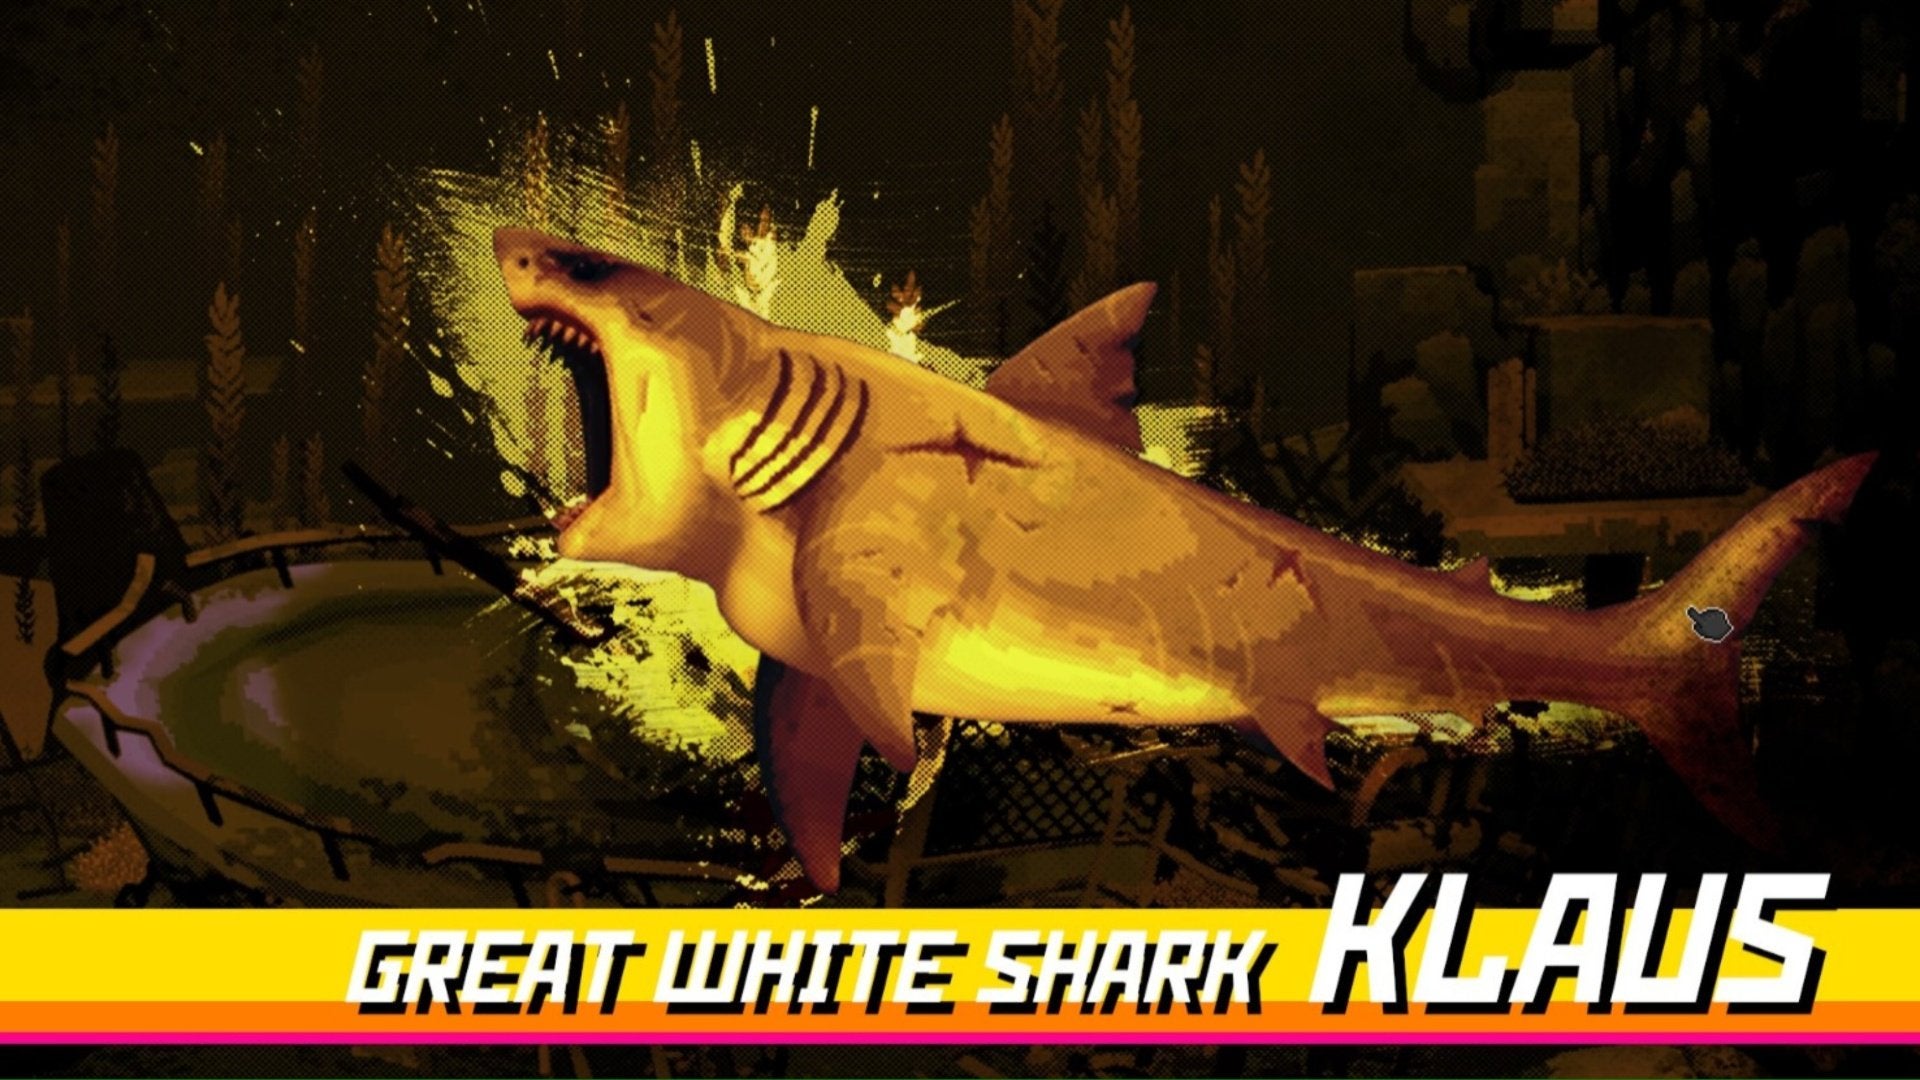 The boss card for the Great White Shark Klaus boss fight in Dave the Diver.